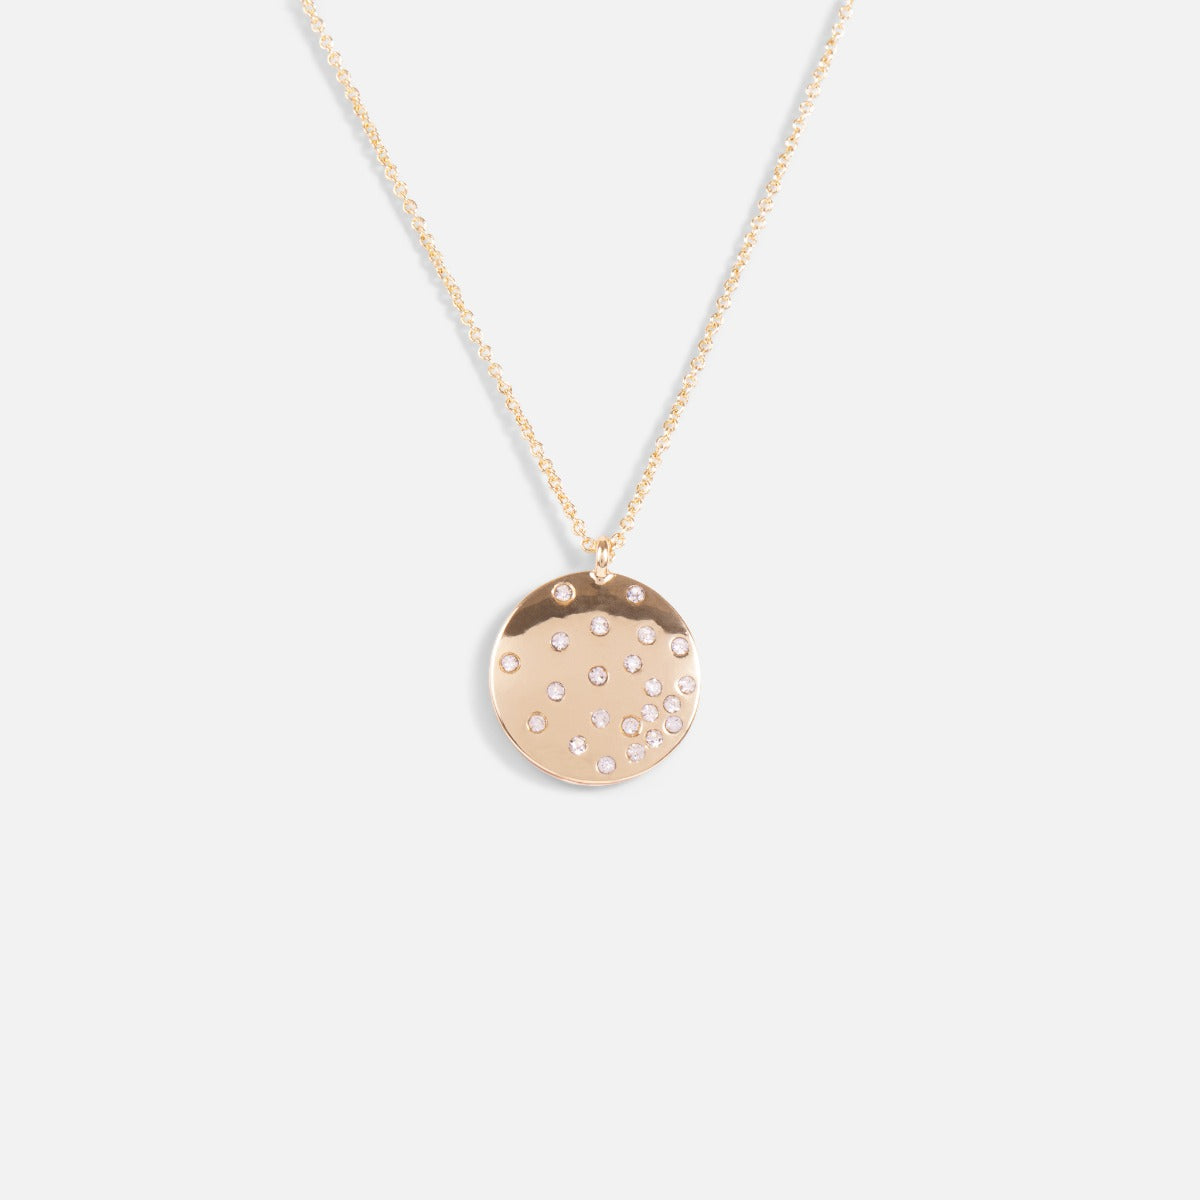 Golden pendant with small sparkling stars medallion